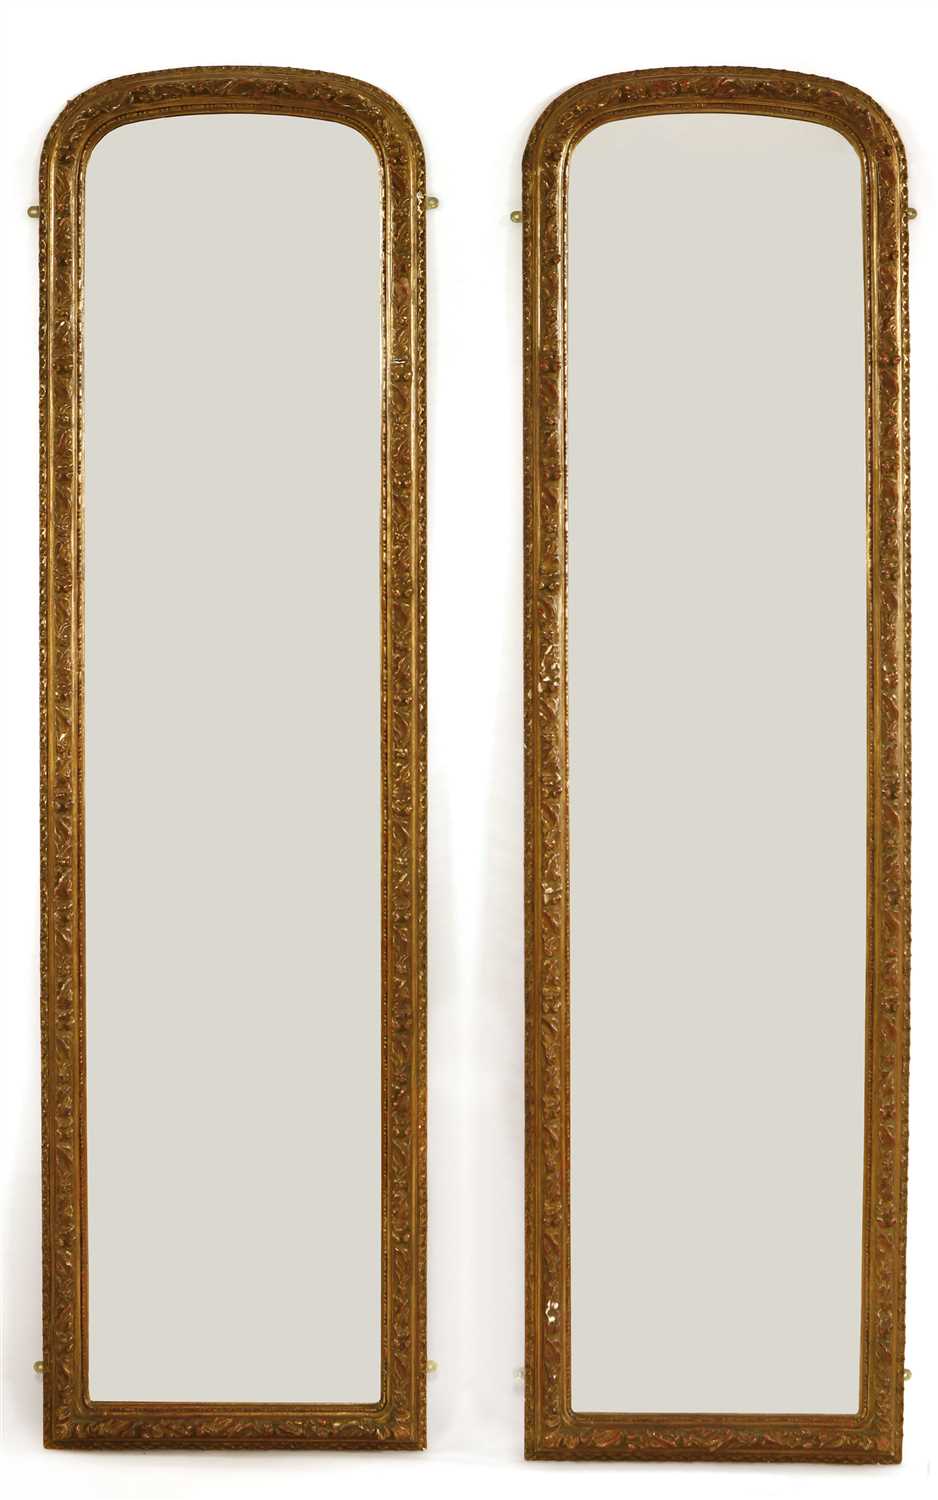 Lot 8 - A pair of tall George III-style pier mirrors